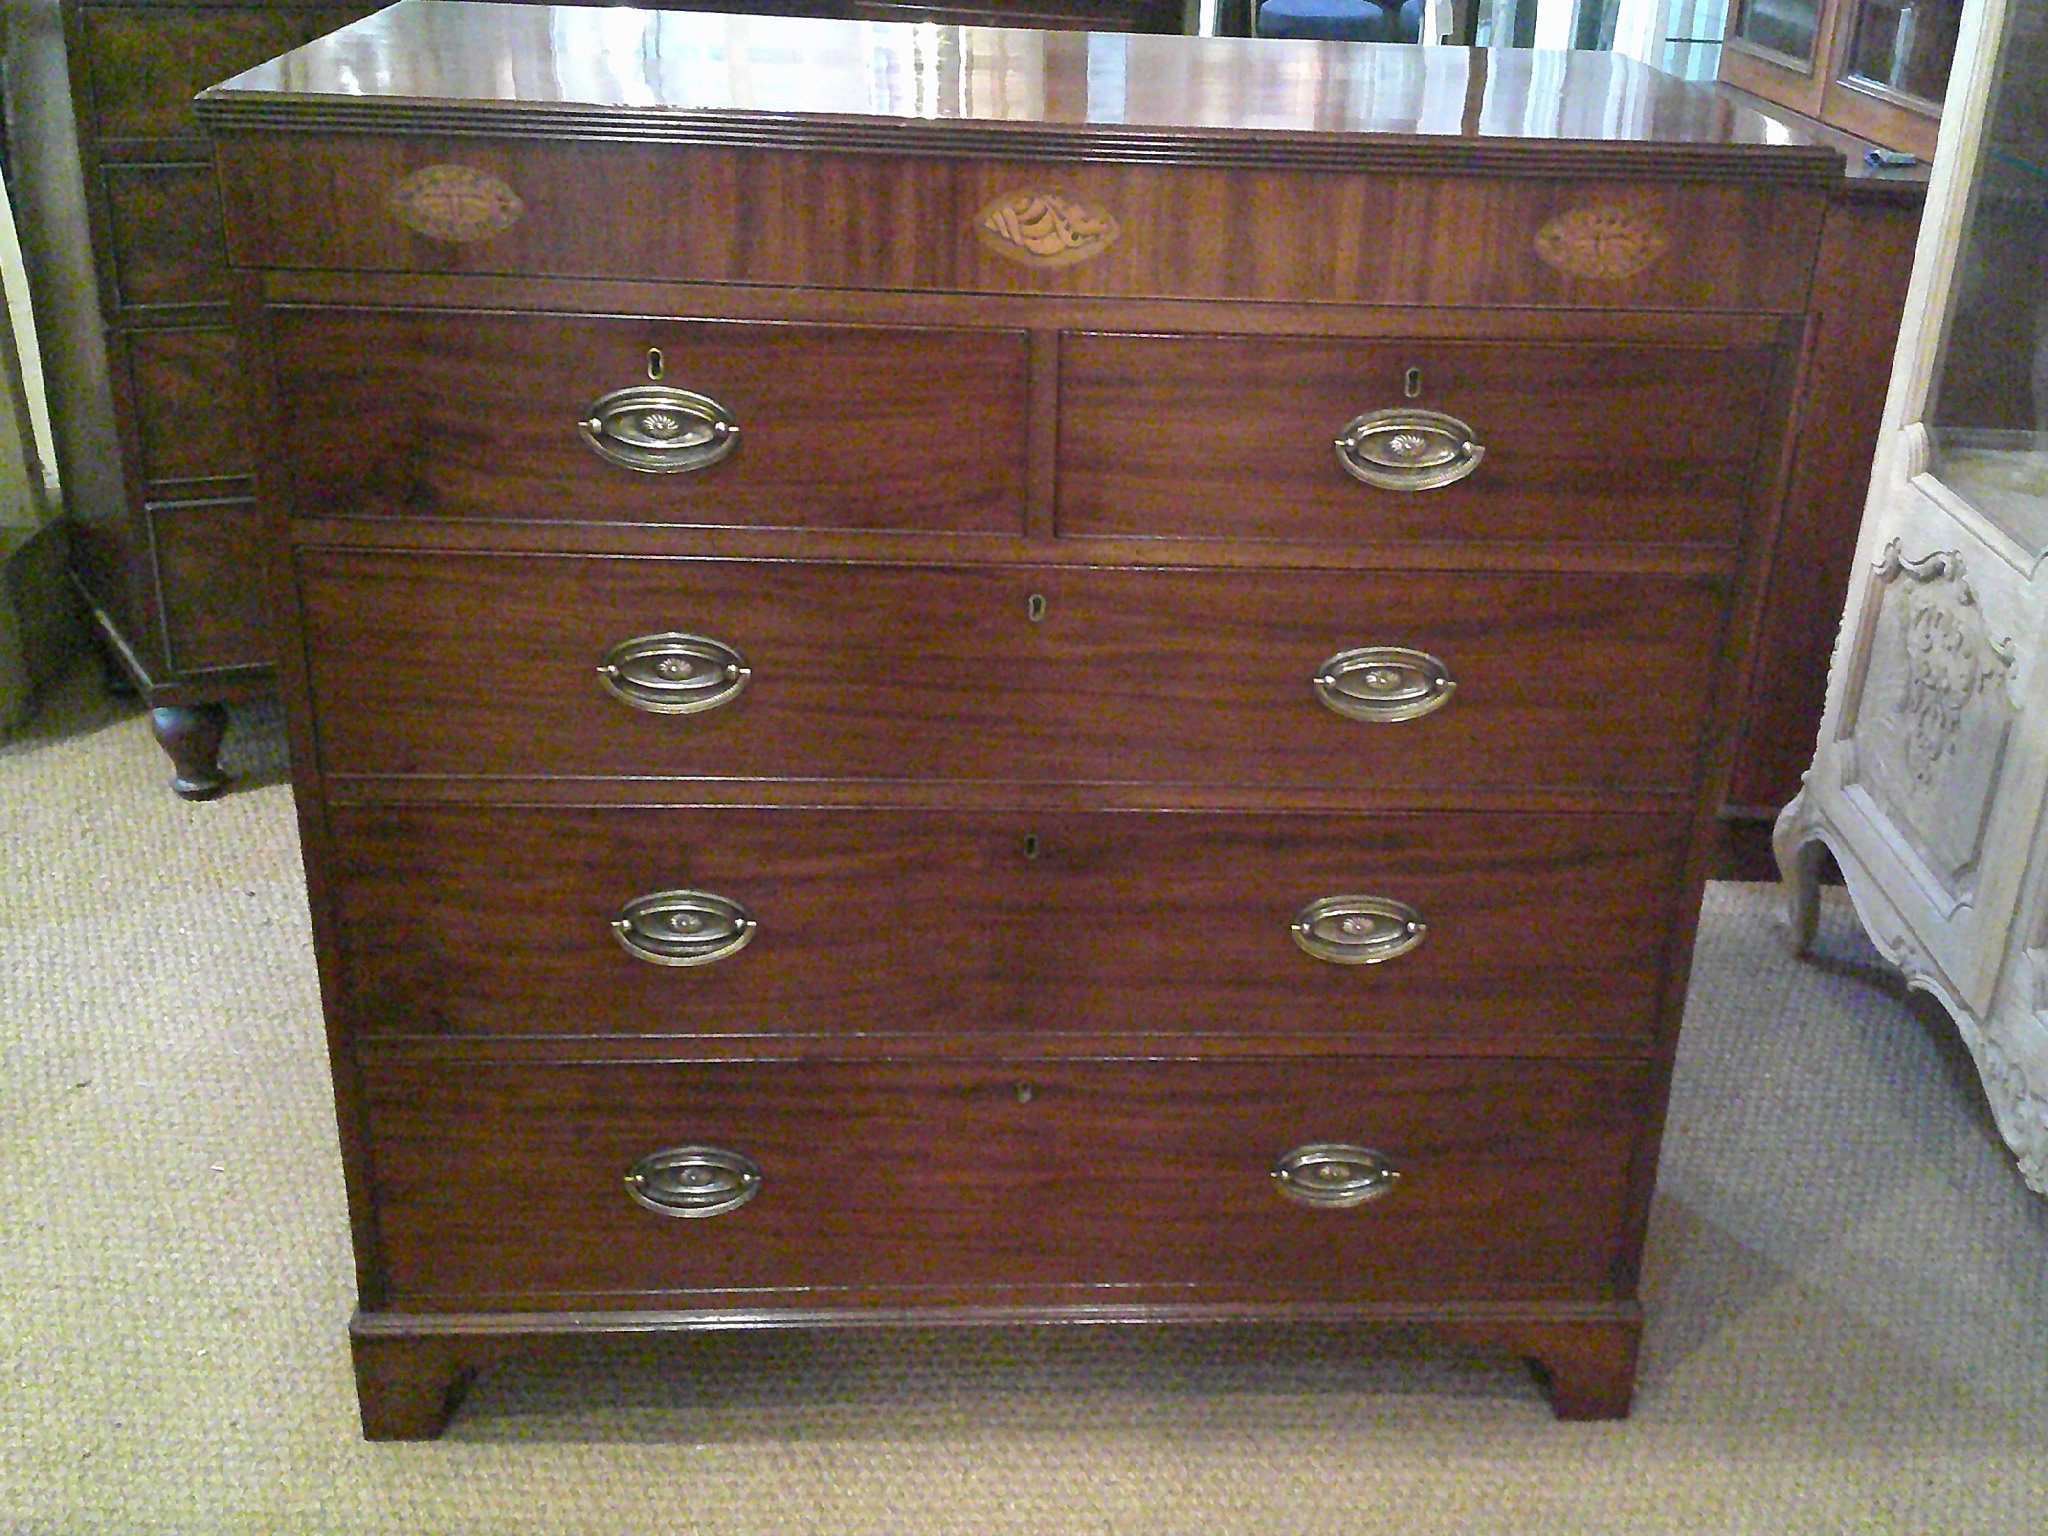 ANTIQUE REGENCY INLAID MAHOGANY CHEST OF DRAWERS